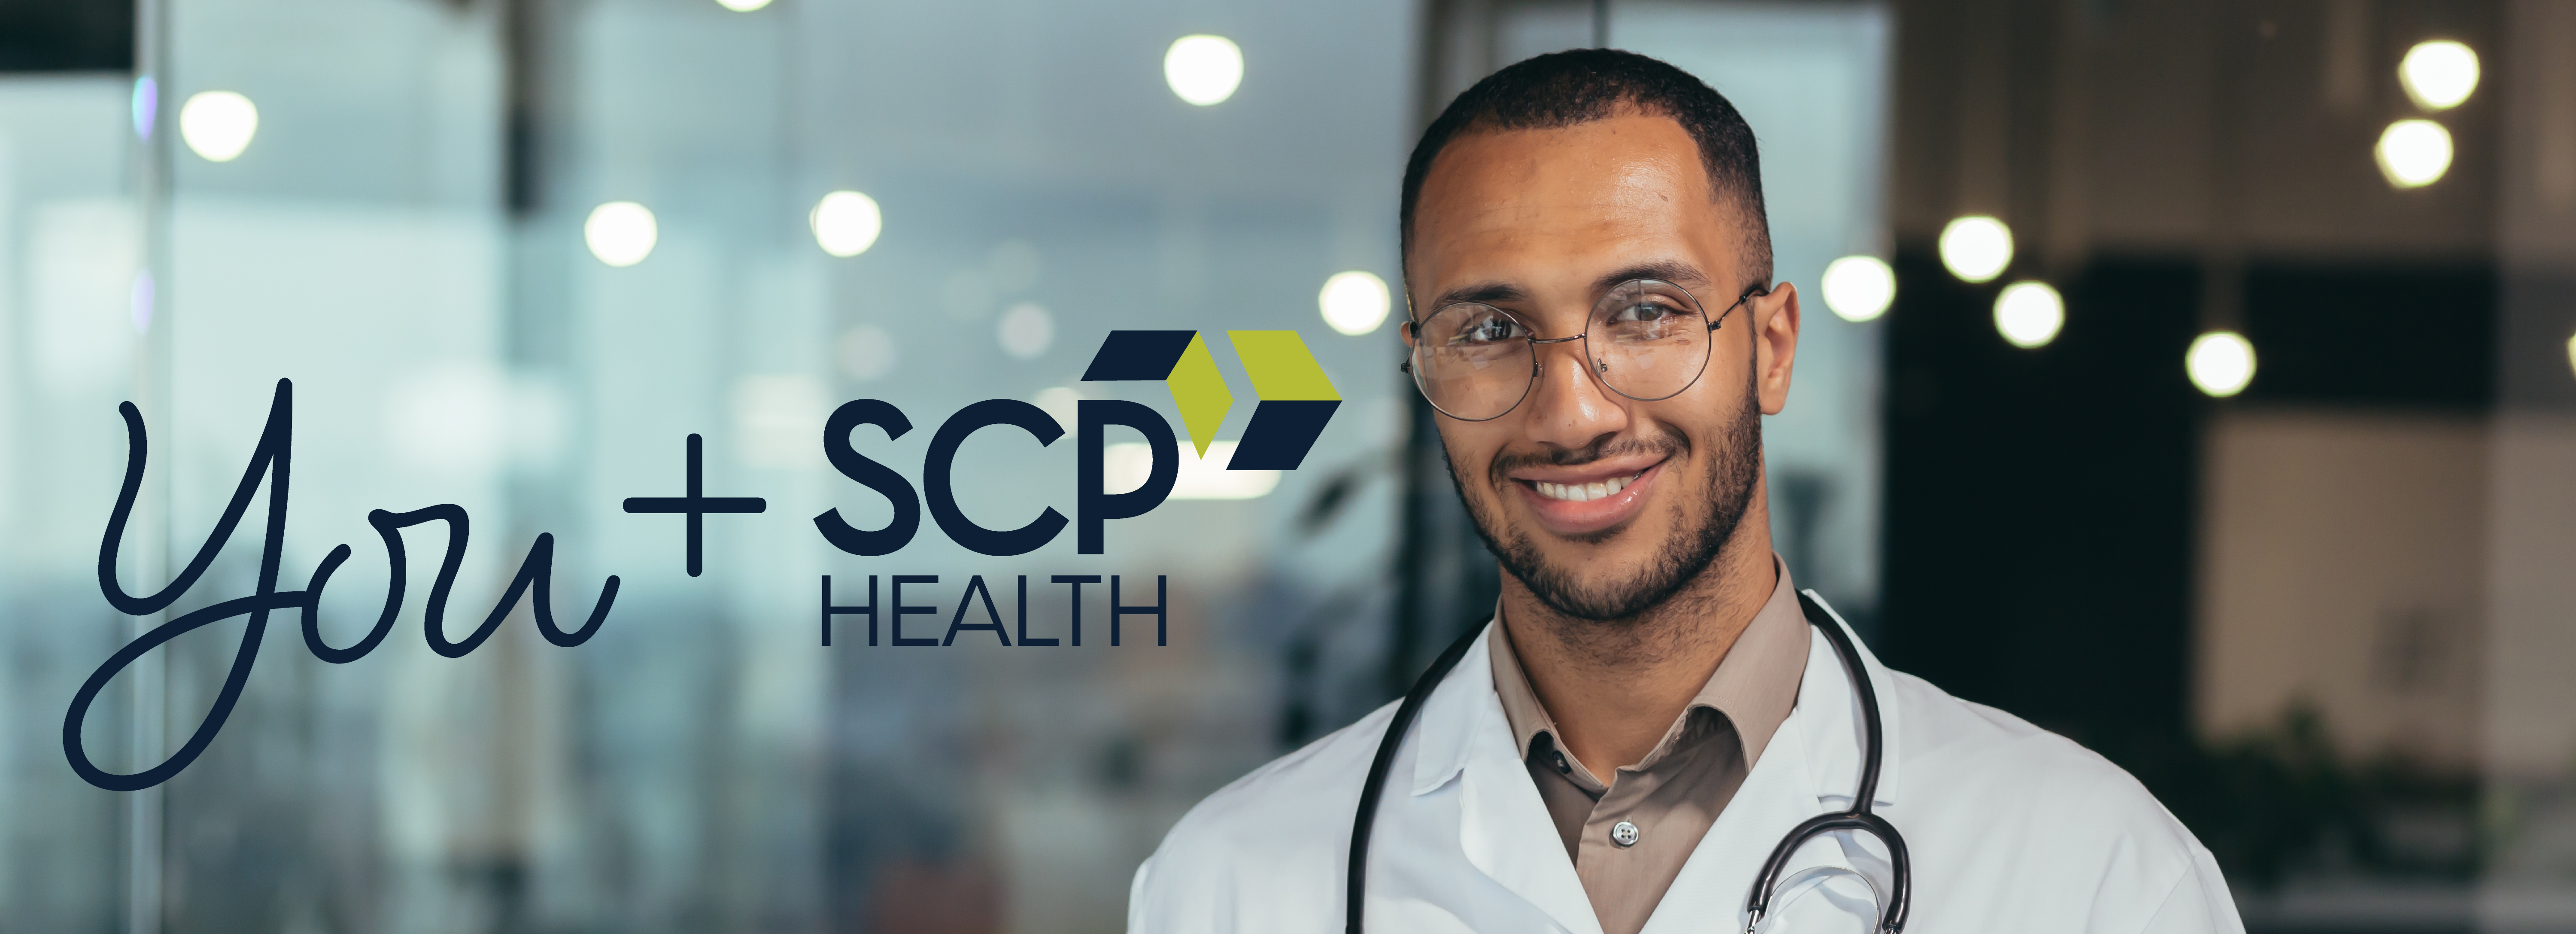 SCP Health - You + SCP